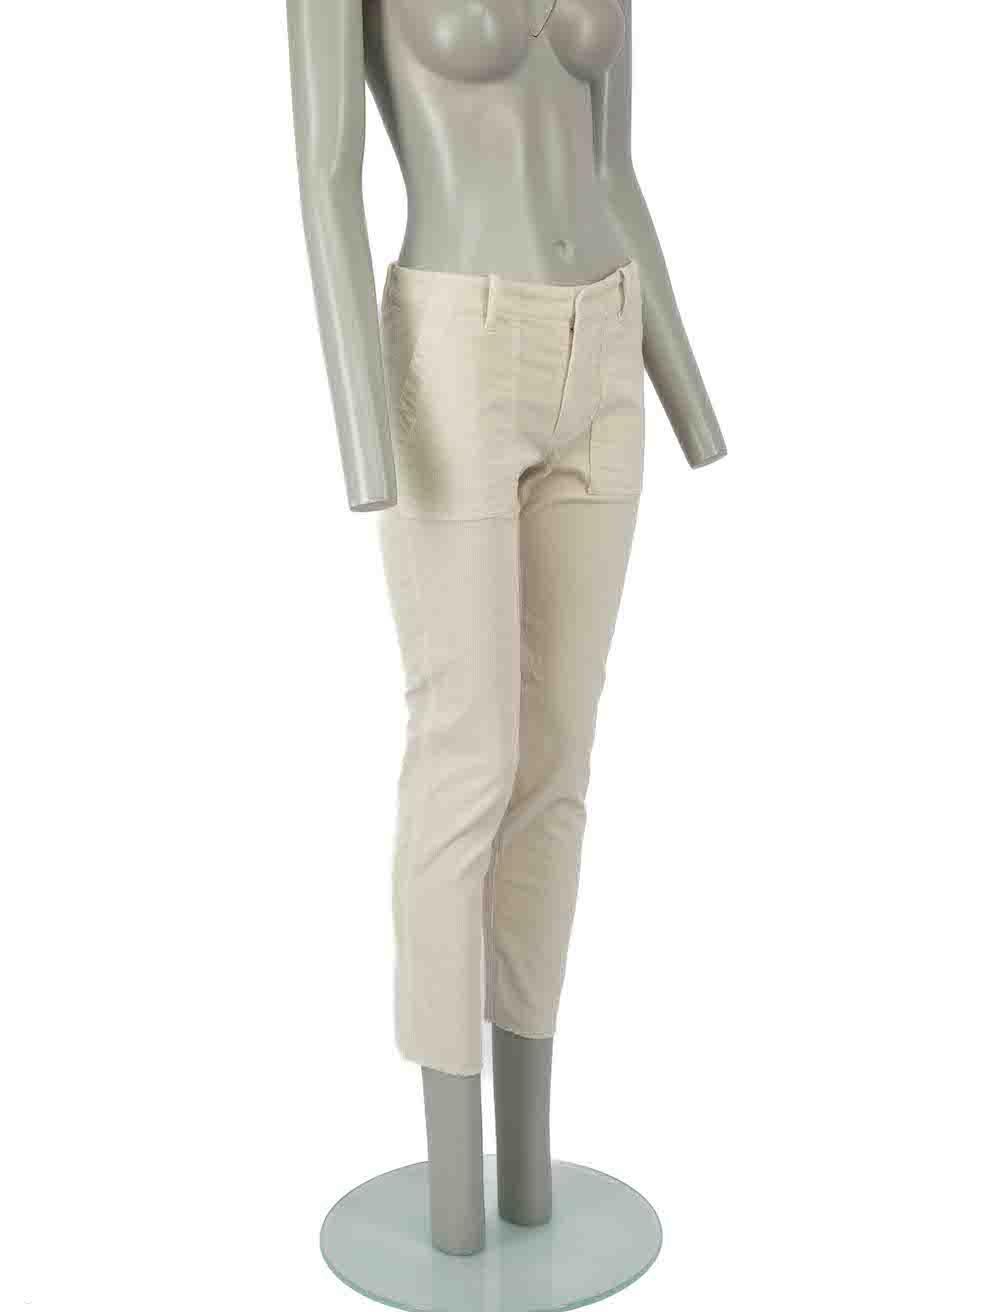 CONDITION is Very good. Hardly any visible wear to trousers is evident on this used Nili Lotan designer resale item.
 
 Details
 Ecru
 Corduroy
 Trousers
 Straight leg
 Cropped length
 Mid rise
 Raw hem
 2x Side pockets
 2x Back pockets
 Fly zip and